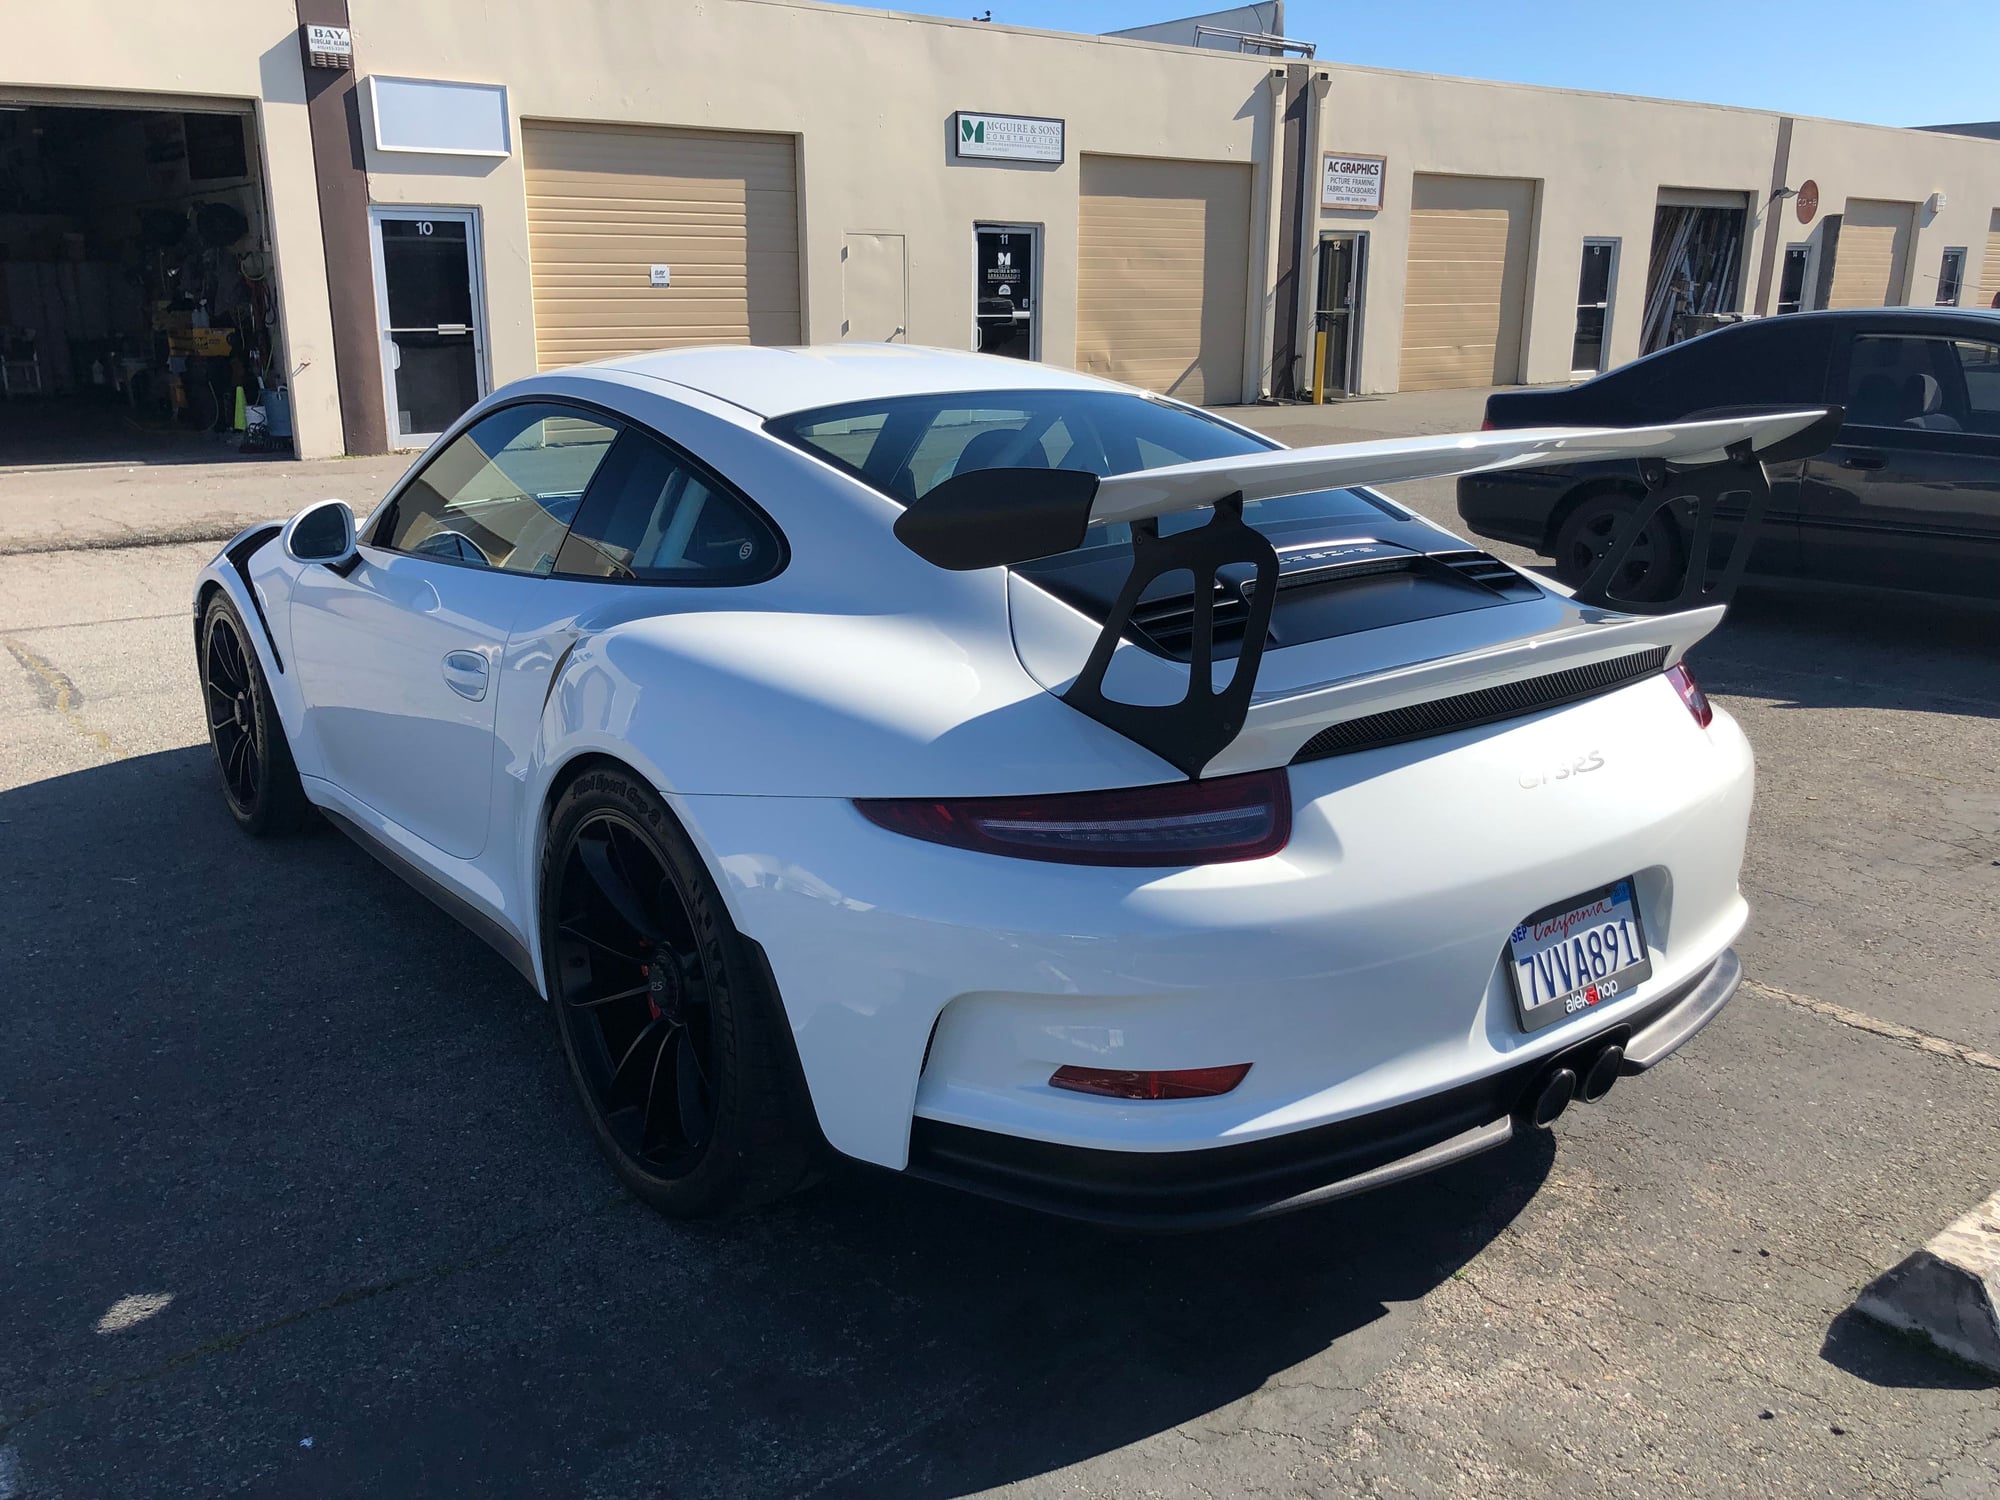 2016 Porsche 911 - 2016 Porsche GT3 RS  **No stories, CPO, one of lowest priced in US** - Used - VIN WP0AF2A9XGS187113 - 20,100 Miles - 6 cyl - 2WD - Automatic - Coupe - White - San Rafael, CA 94901, United States